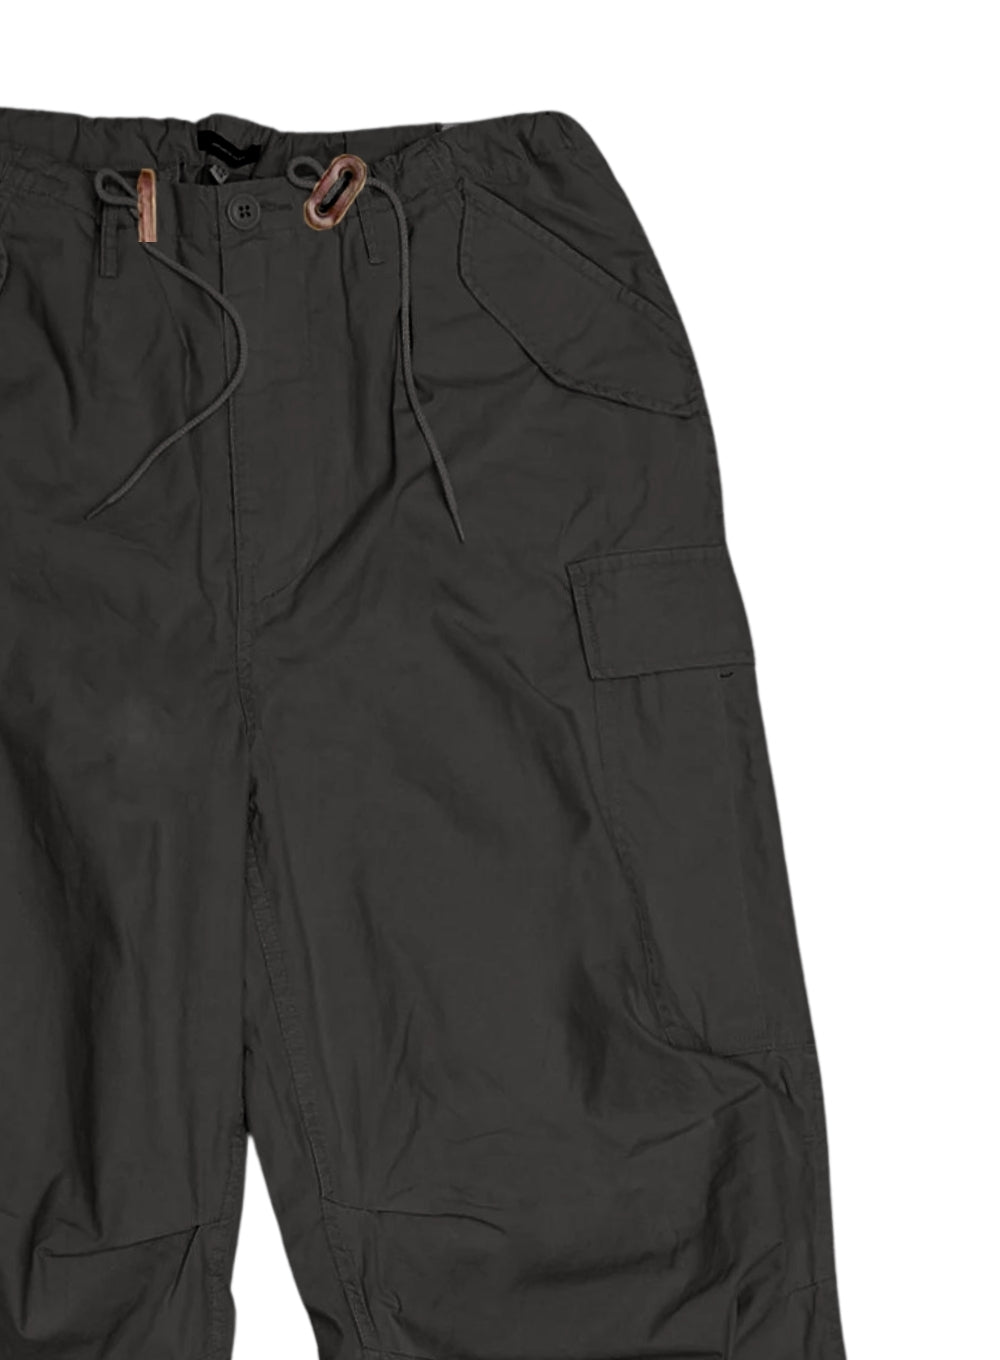 Black Commando Pant (Tailored Fit) - Online Army Store